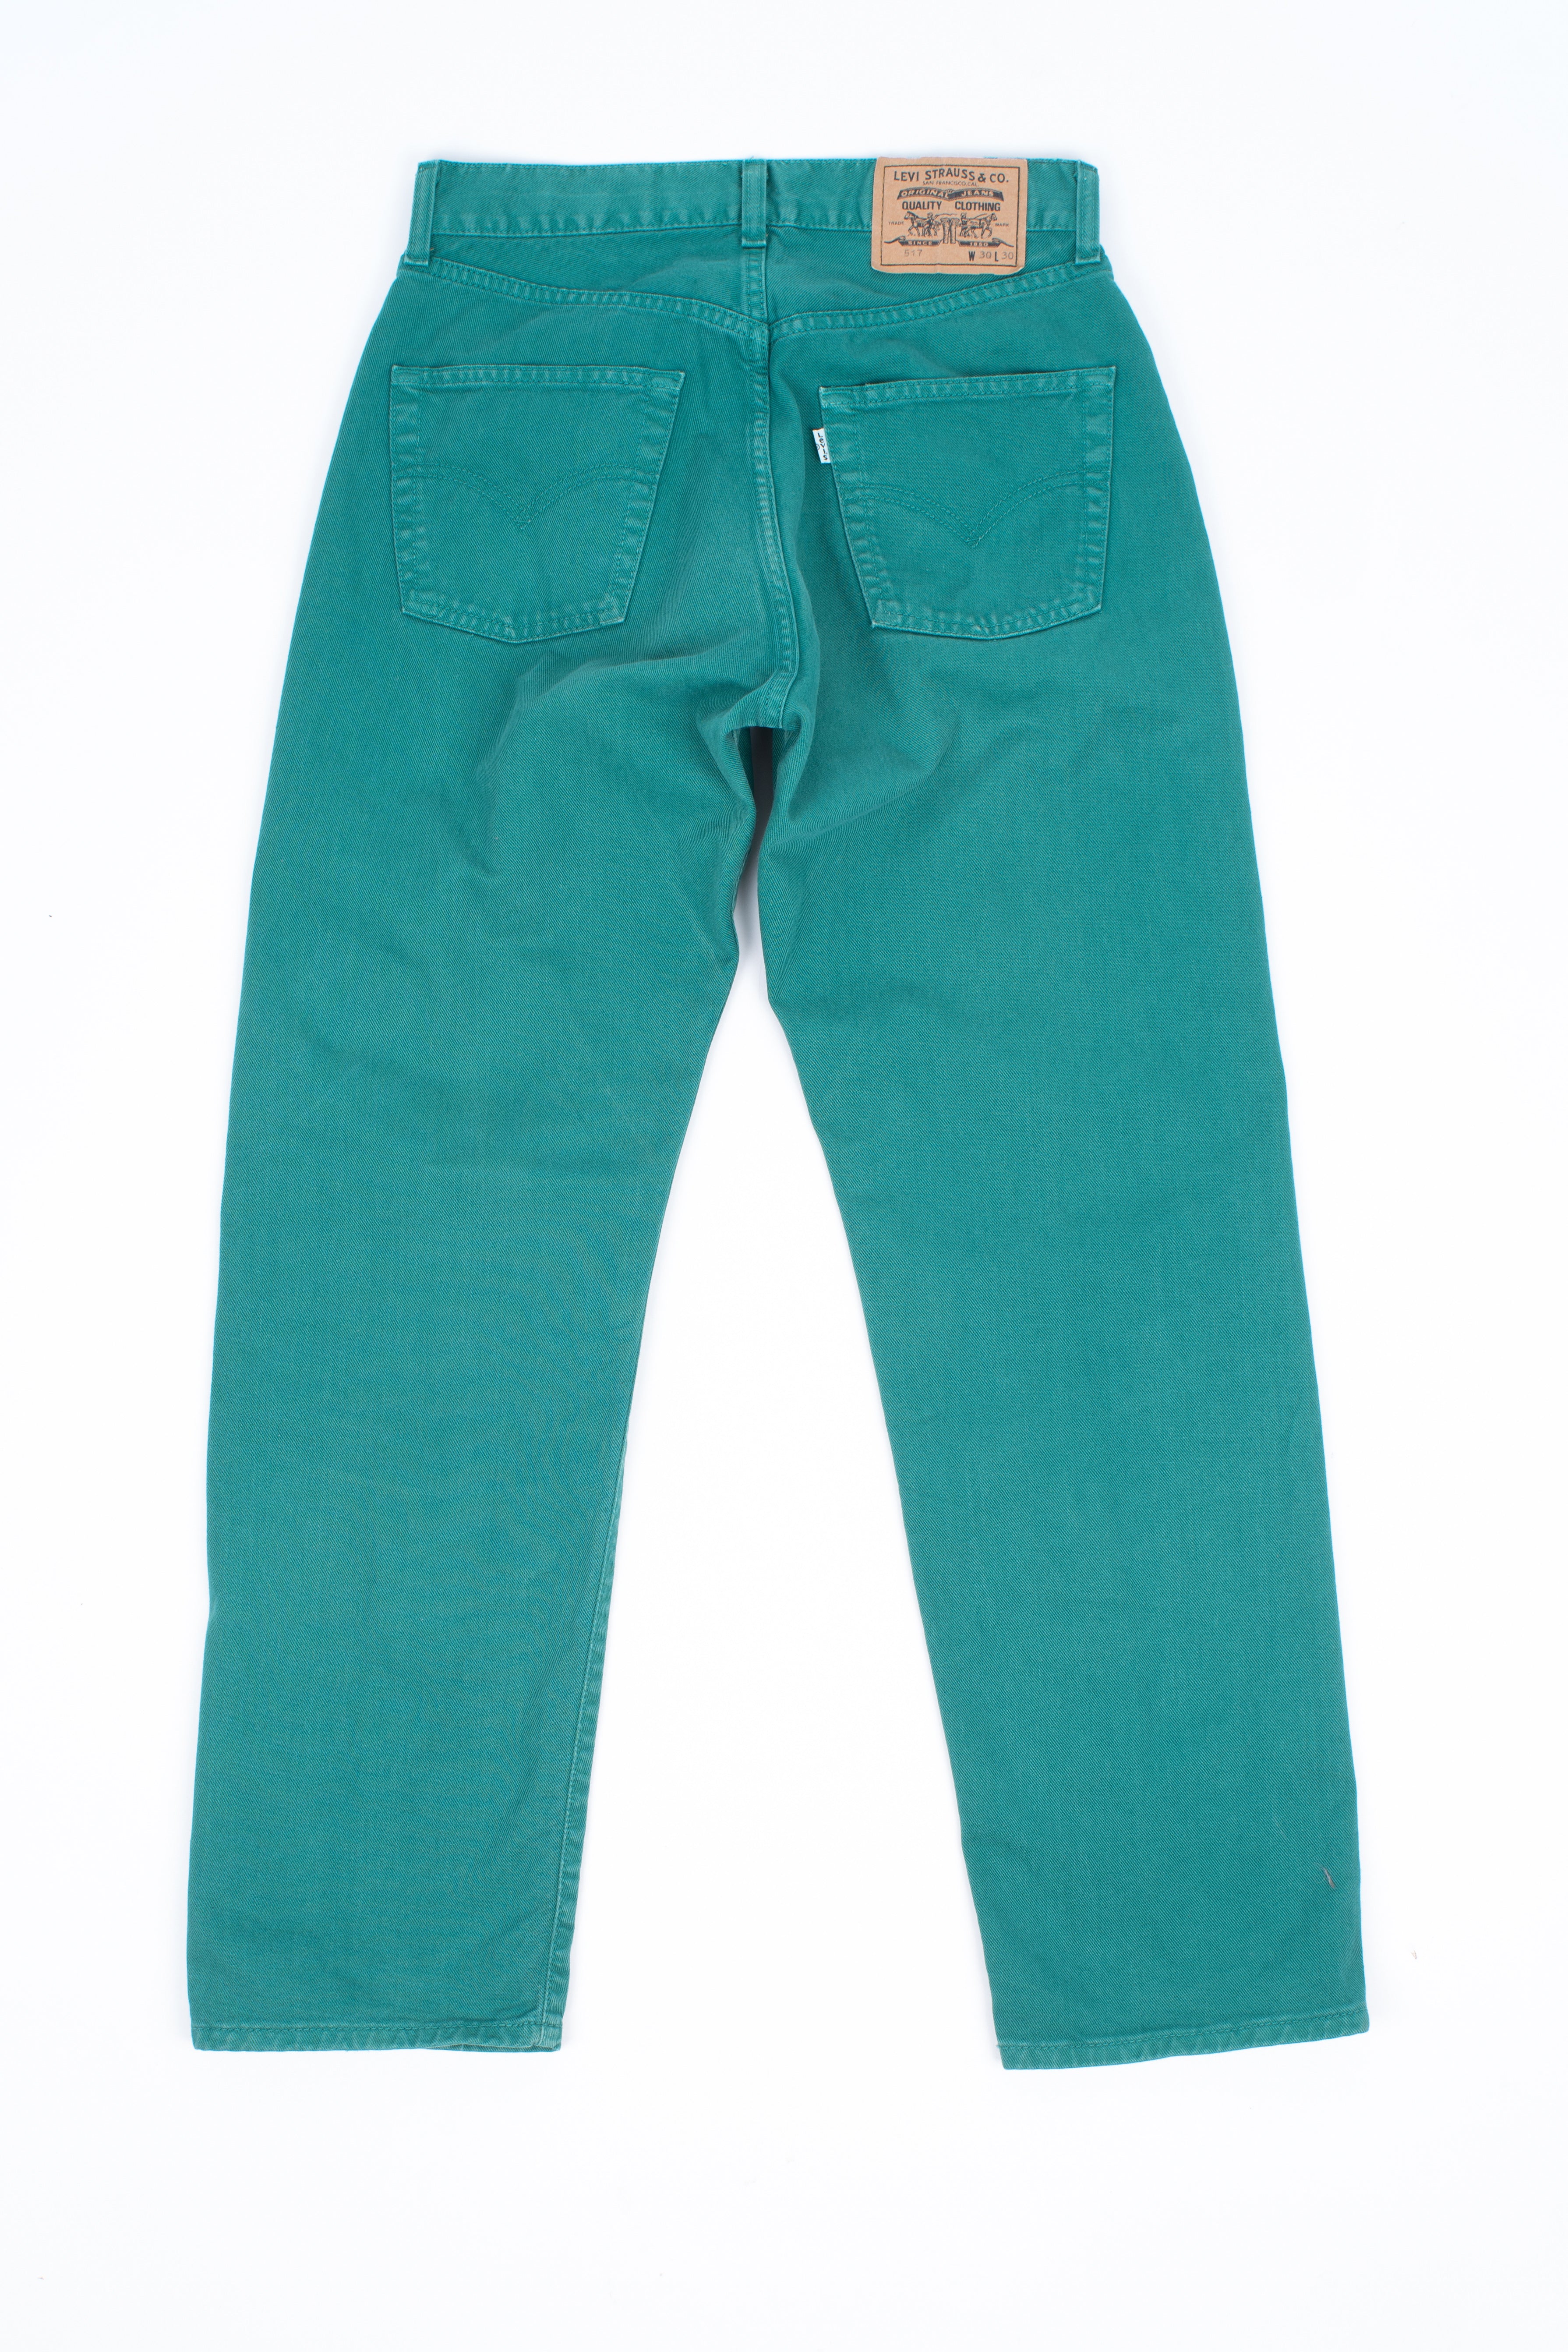 Levi’s 517 White Tab Vintage Green Jeans Made in Italy, W30/L30